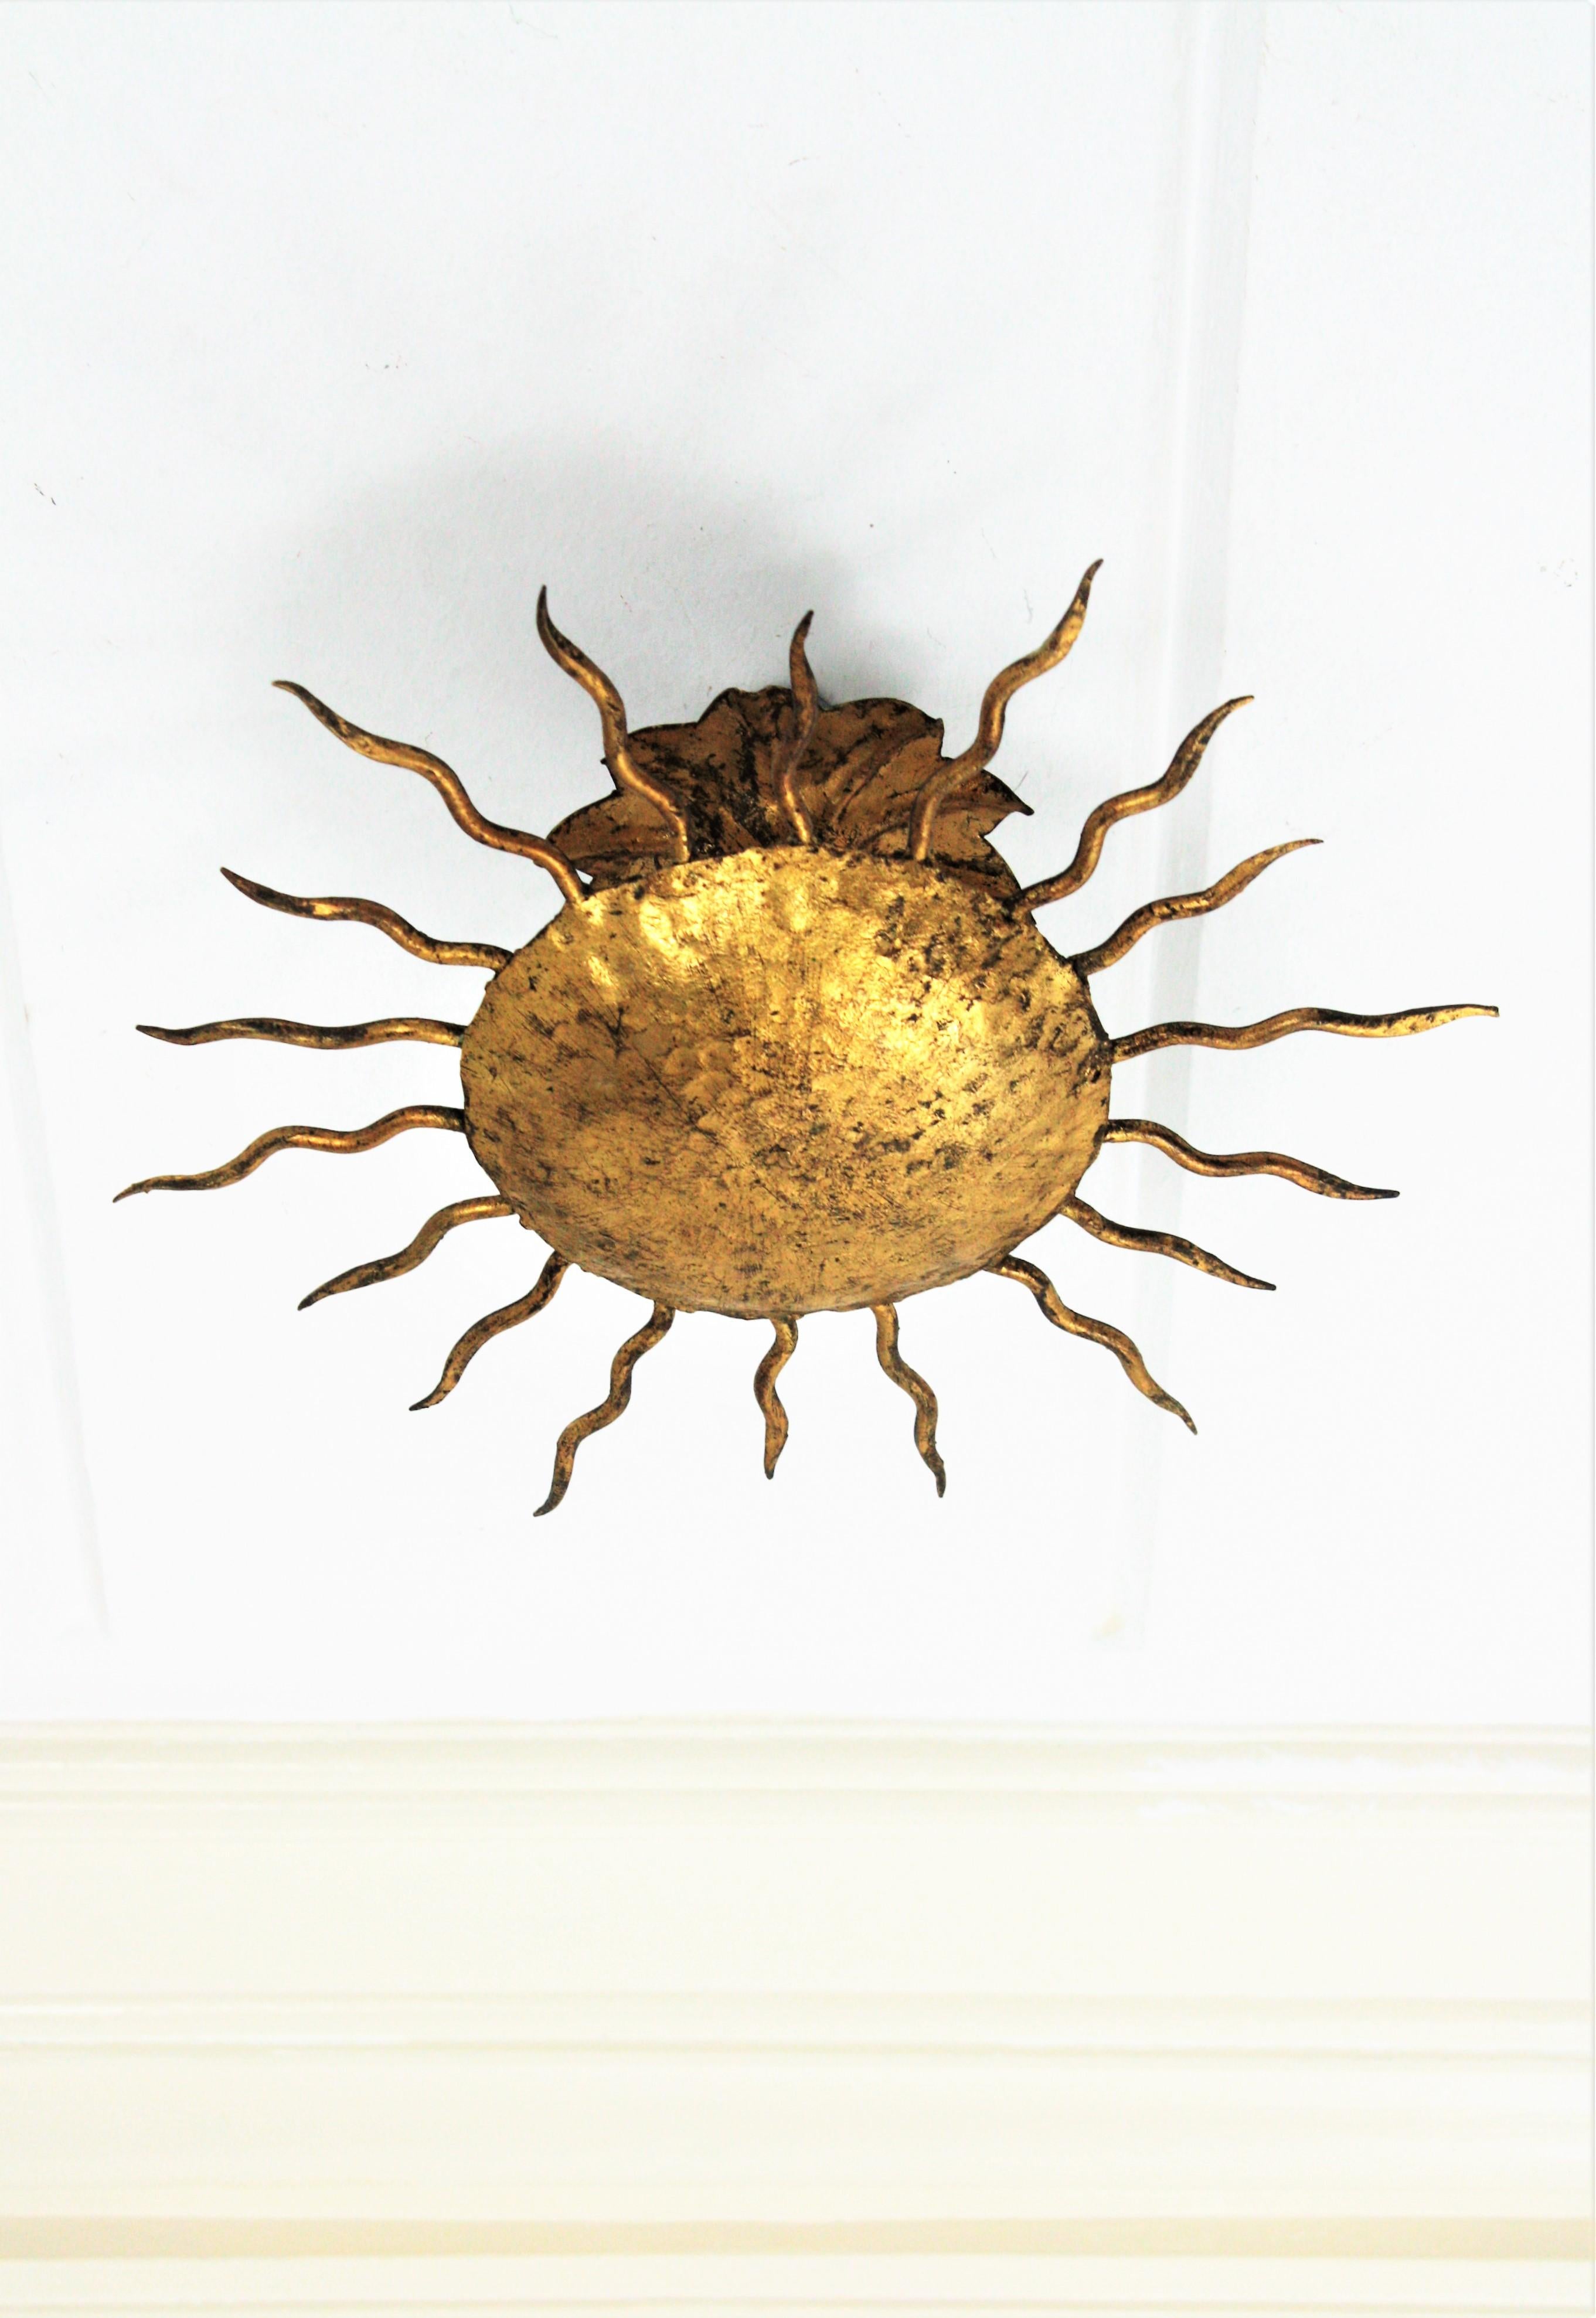 Small Gilt Iron Sunburst Flush Mount Ceiling Light / Wall Sconce. Spain, 1940s
Lovely hand-hammered iron gold leaf gilt sunburst light fixture in an unusual small size. In the style of Gilbert Poillerat
Richly decored in the central part with the